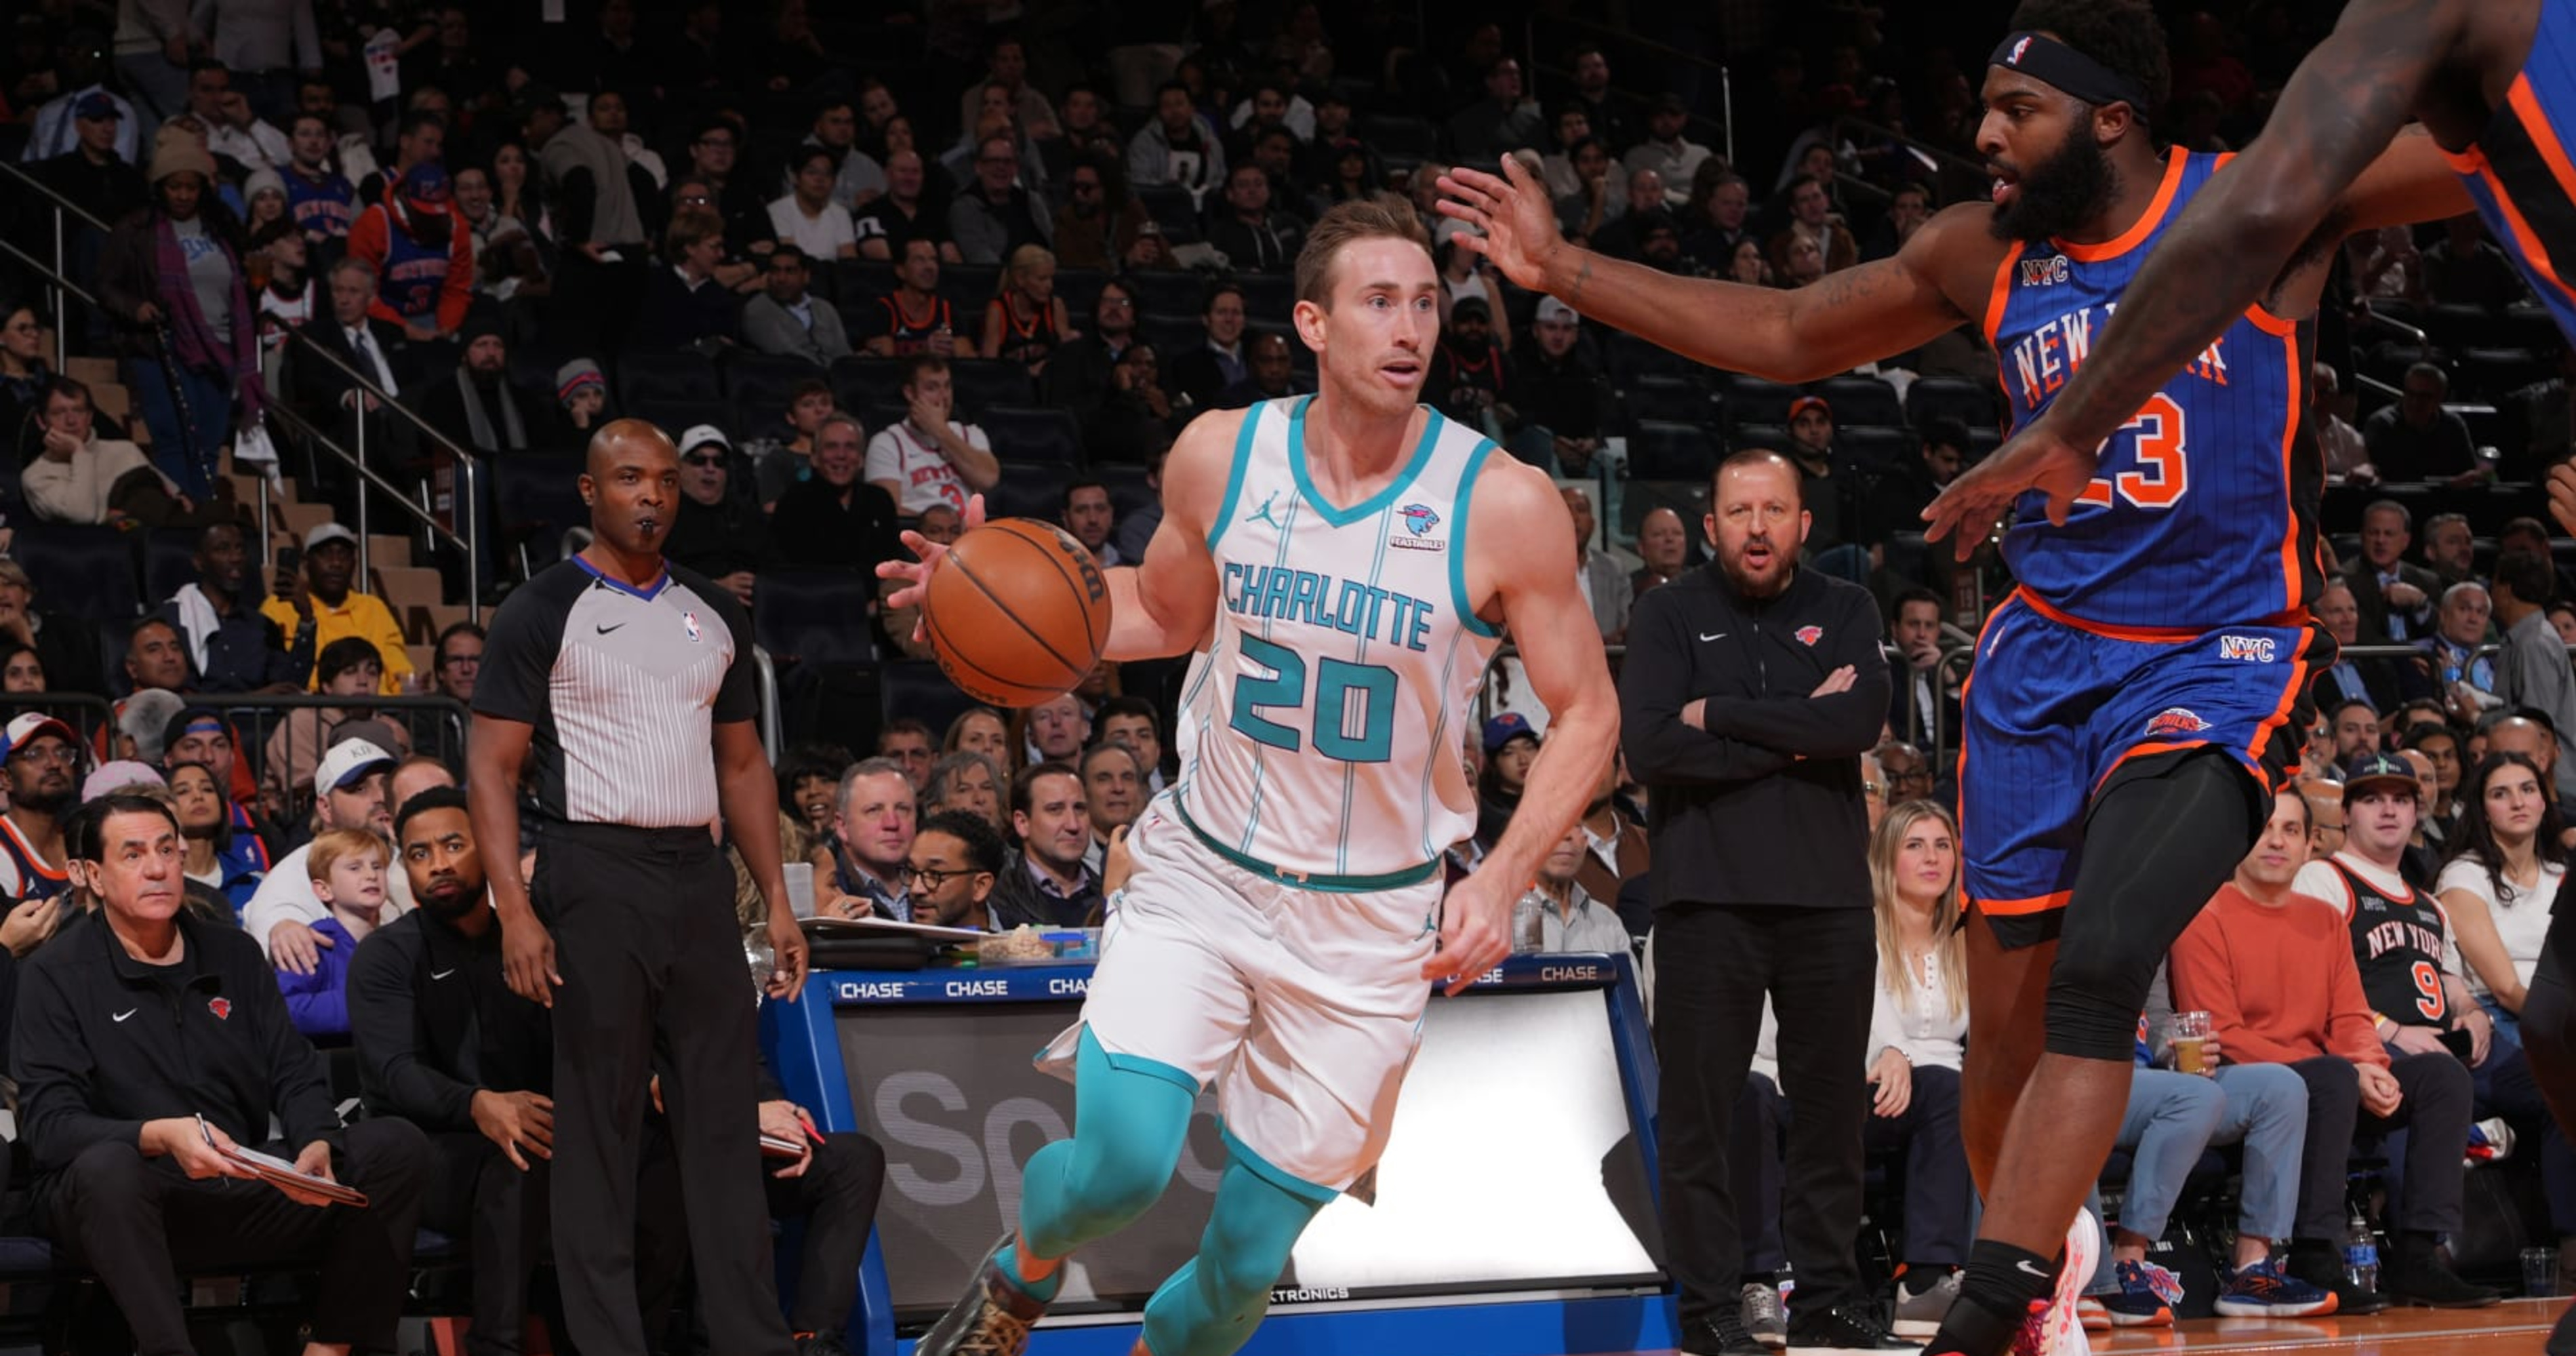 Gordon Hayward's Contract with Hornets Entering Its Final Year, Could Be a  Trade Asset for Charlotte - BVM Sports